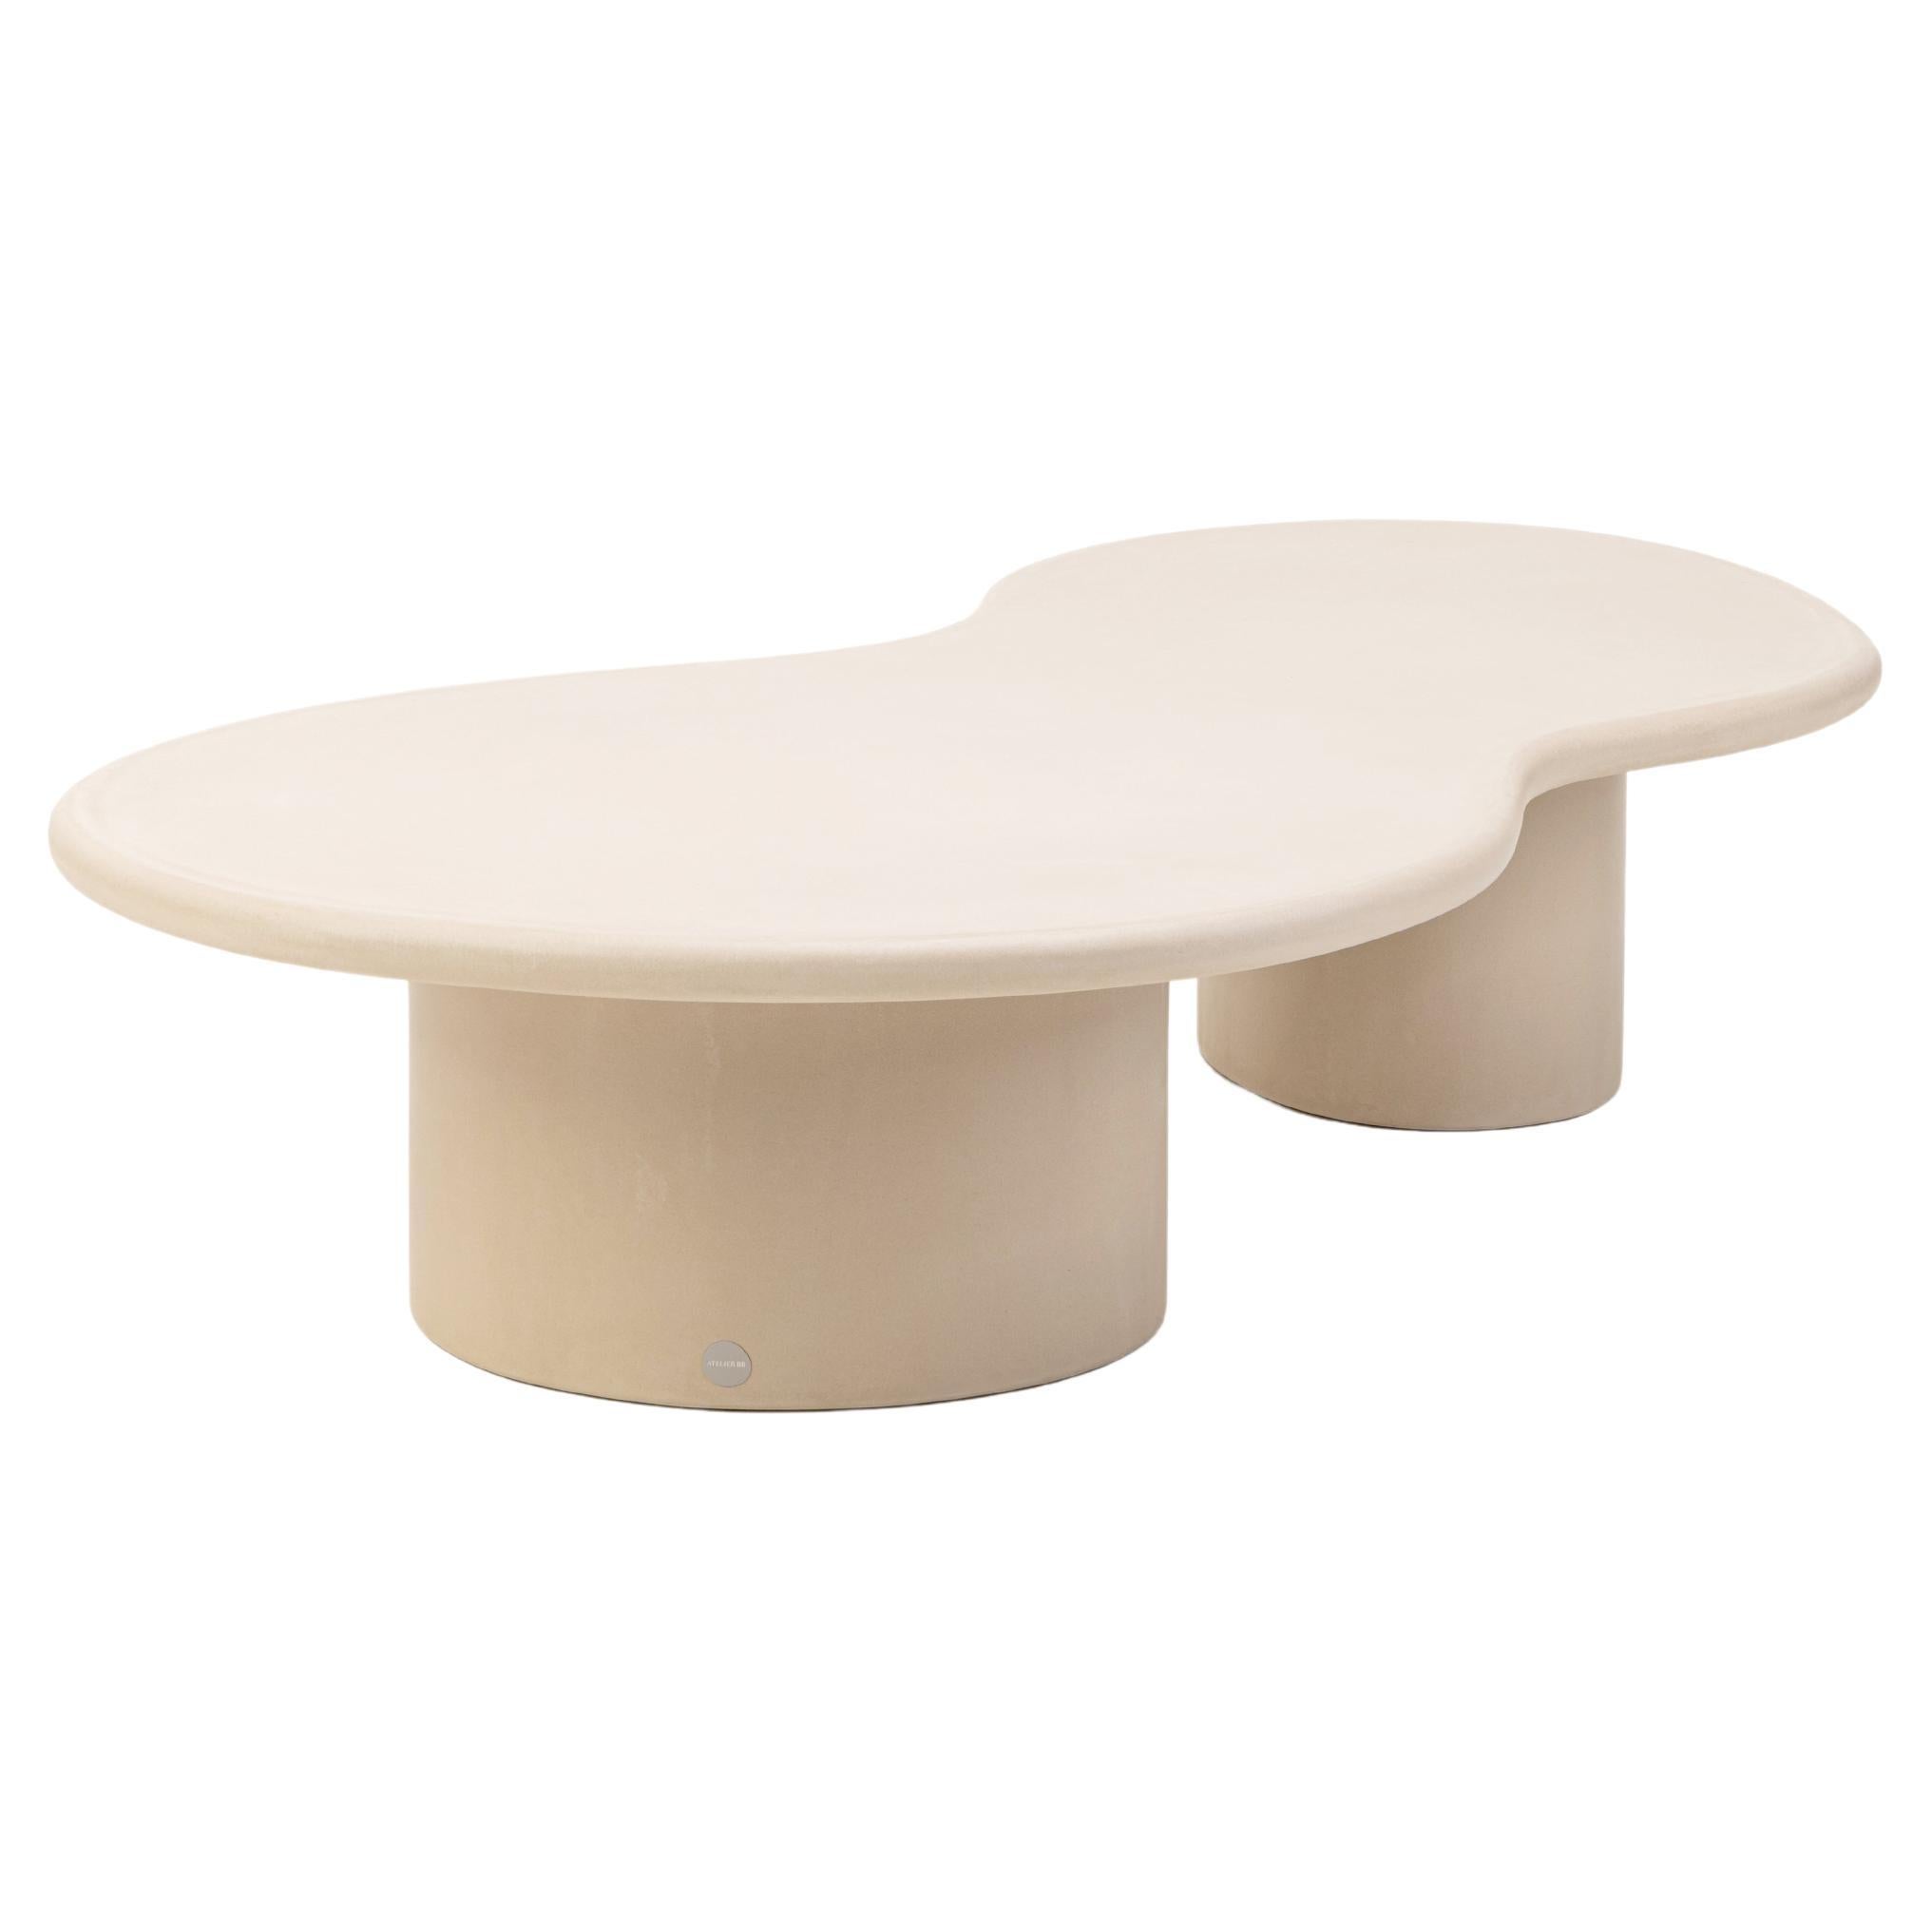 Organic Shaped Natural Plaster Coffee Table "Ovum" 150 by Isabelle Beaumont